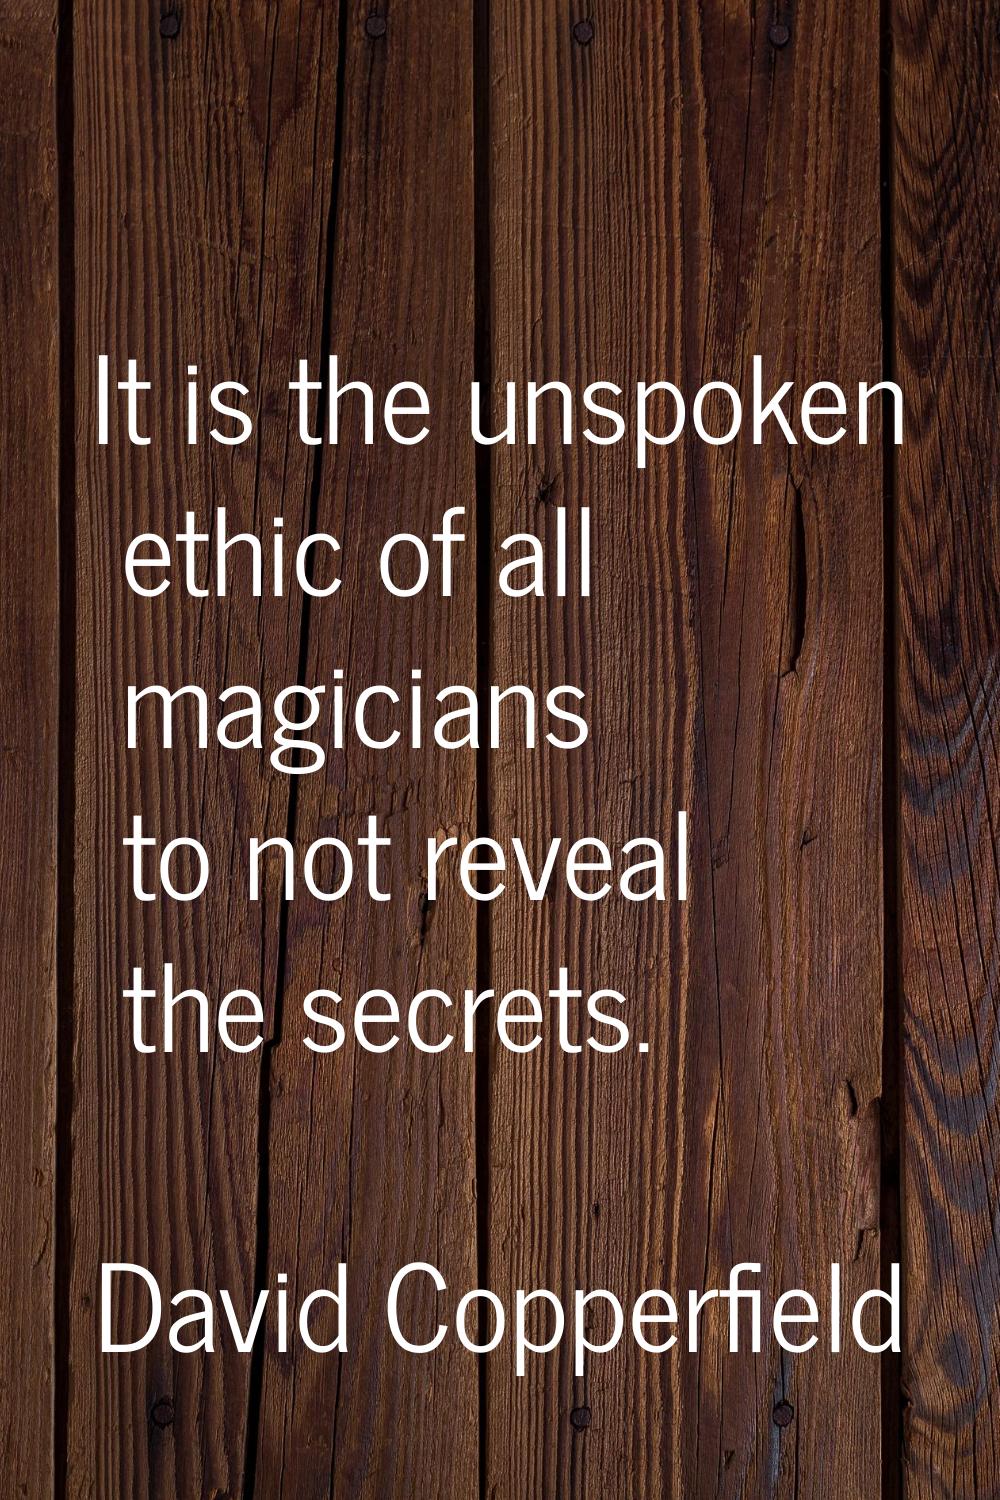 It is the unspoken ethic of all magicians to not reveal the secrets.